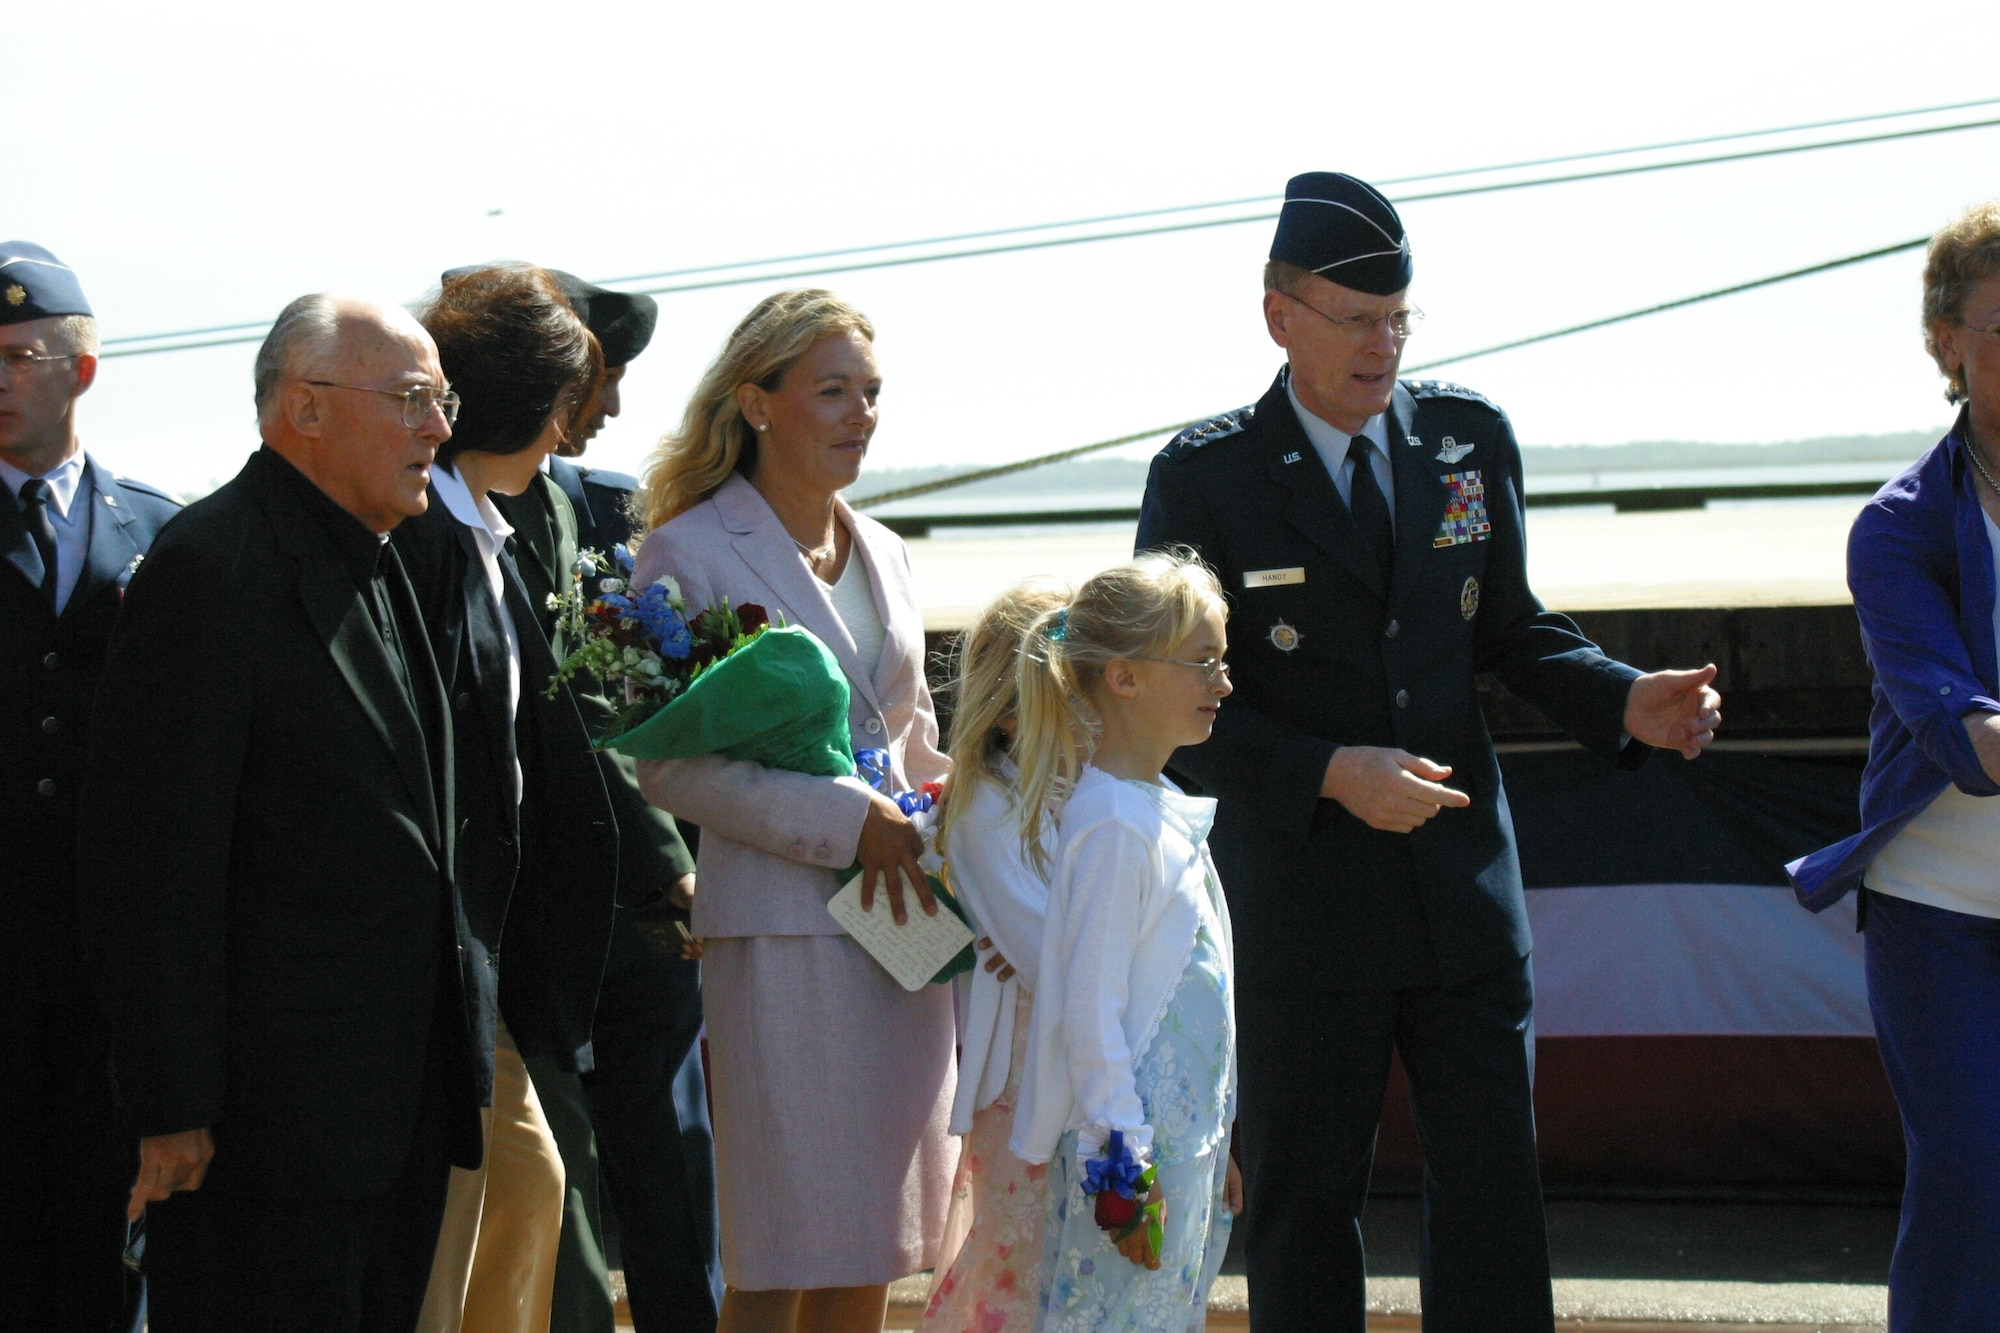 SUNNY POINT, N.C. -- Gen. John W. Handy greets the family of Tech. Sgt. John Chapman at the naming of a Military Sealift Command vessel in Chapman’s honor. General Handy is Air Mobility Command and Transportation Command commander. (U.S. Air Force photo by Lisa Terry McKeown)